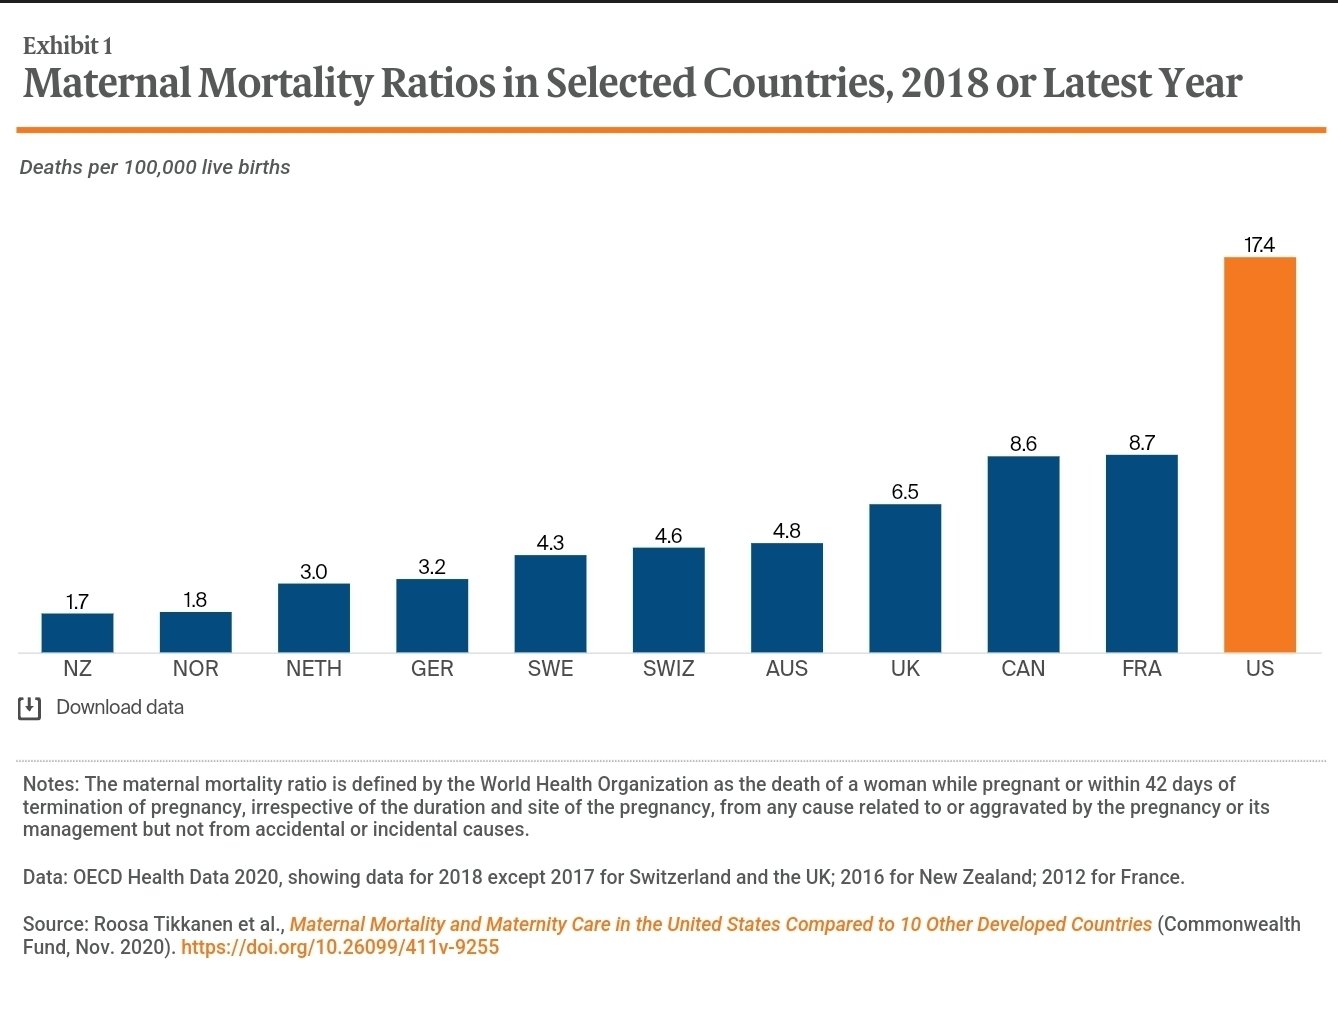 Source: Roosa Tikkanen et al., Maternal Mortality and Maternity Care in the United States Compared to 10 Other Developed Countries (Commonwealth Fund, Nov. 2020). https://doi.org/10.26099/411v-9255
L